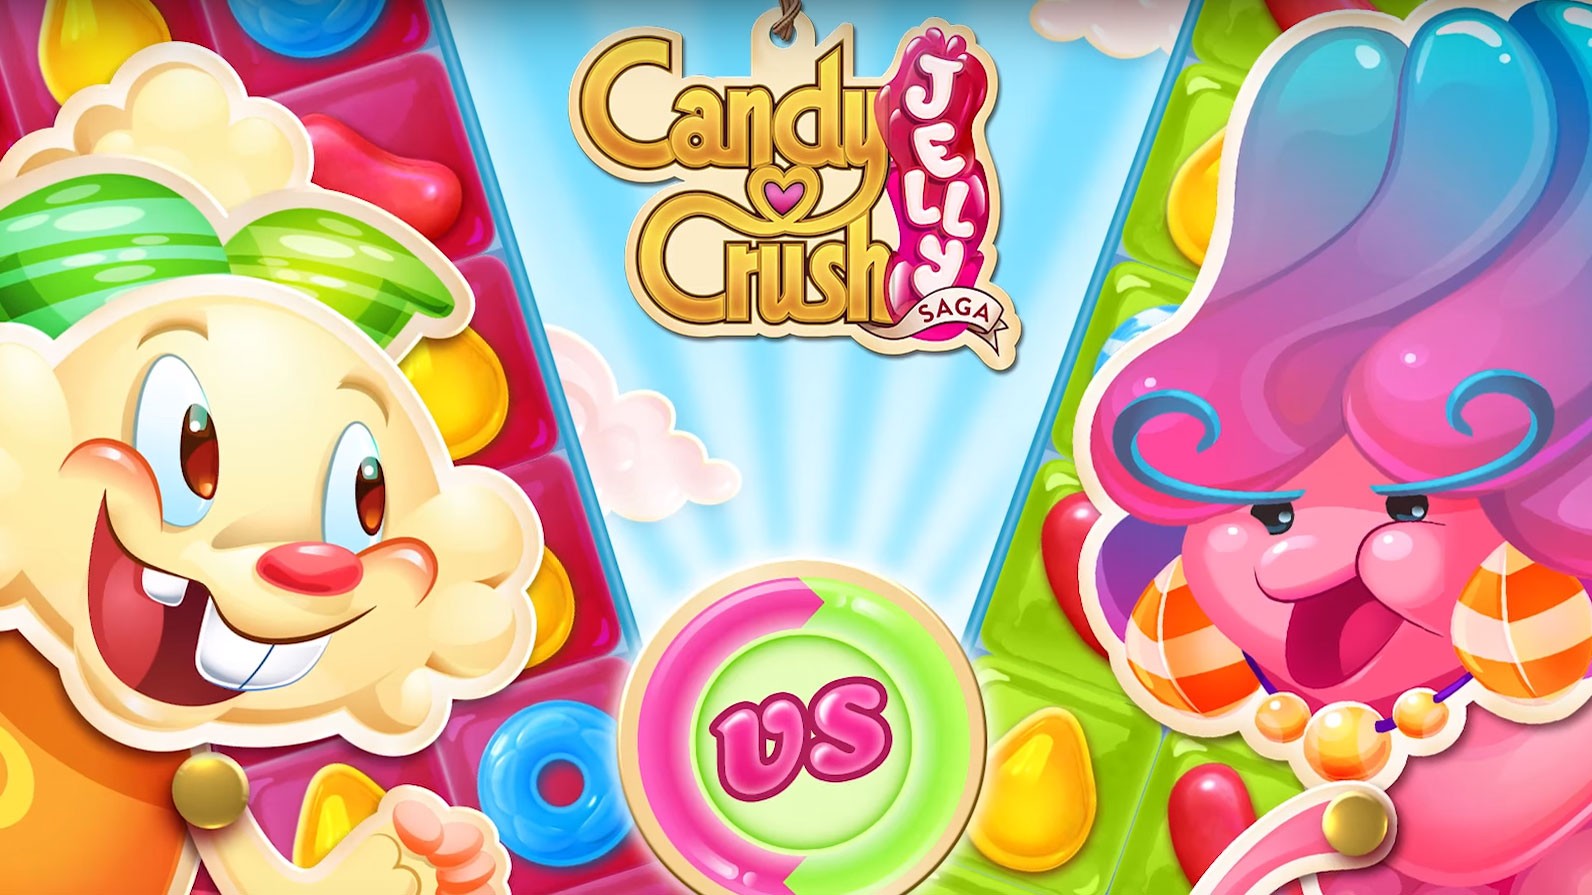 what percent of candy crush players also play soda and jelly saga?